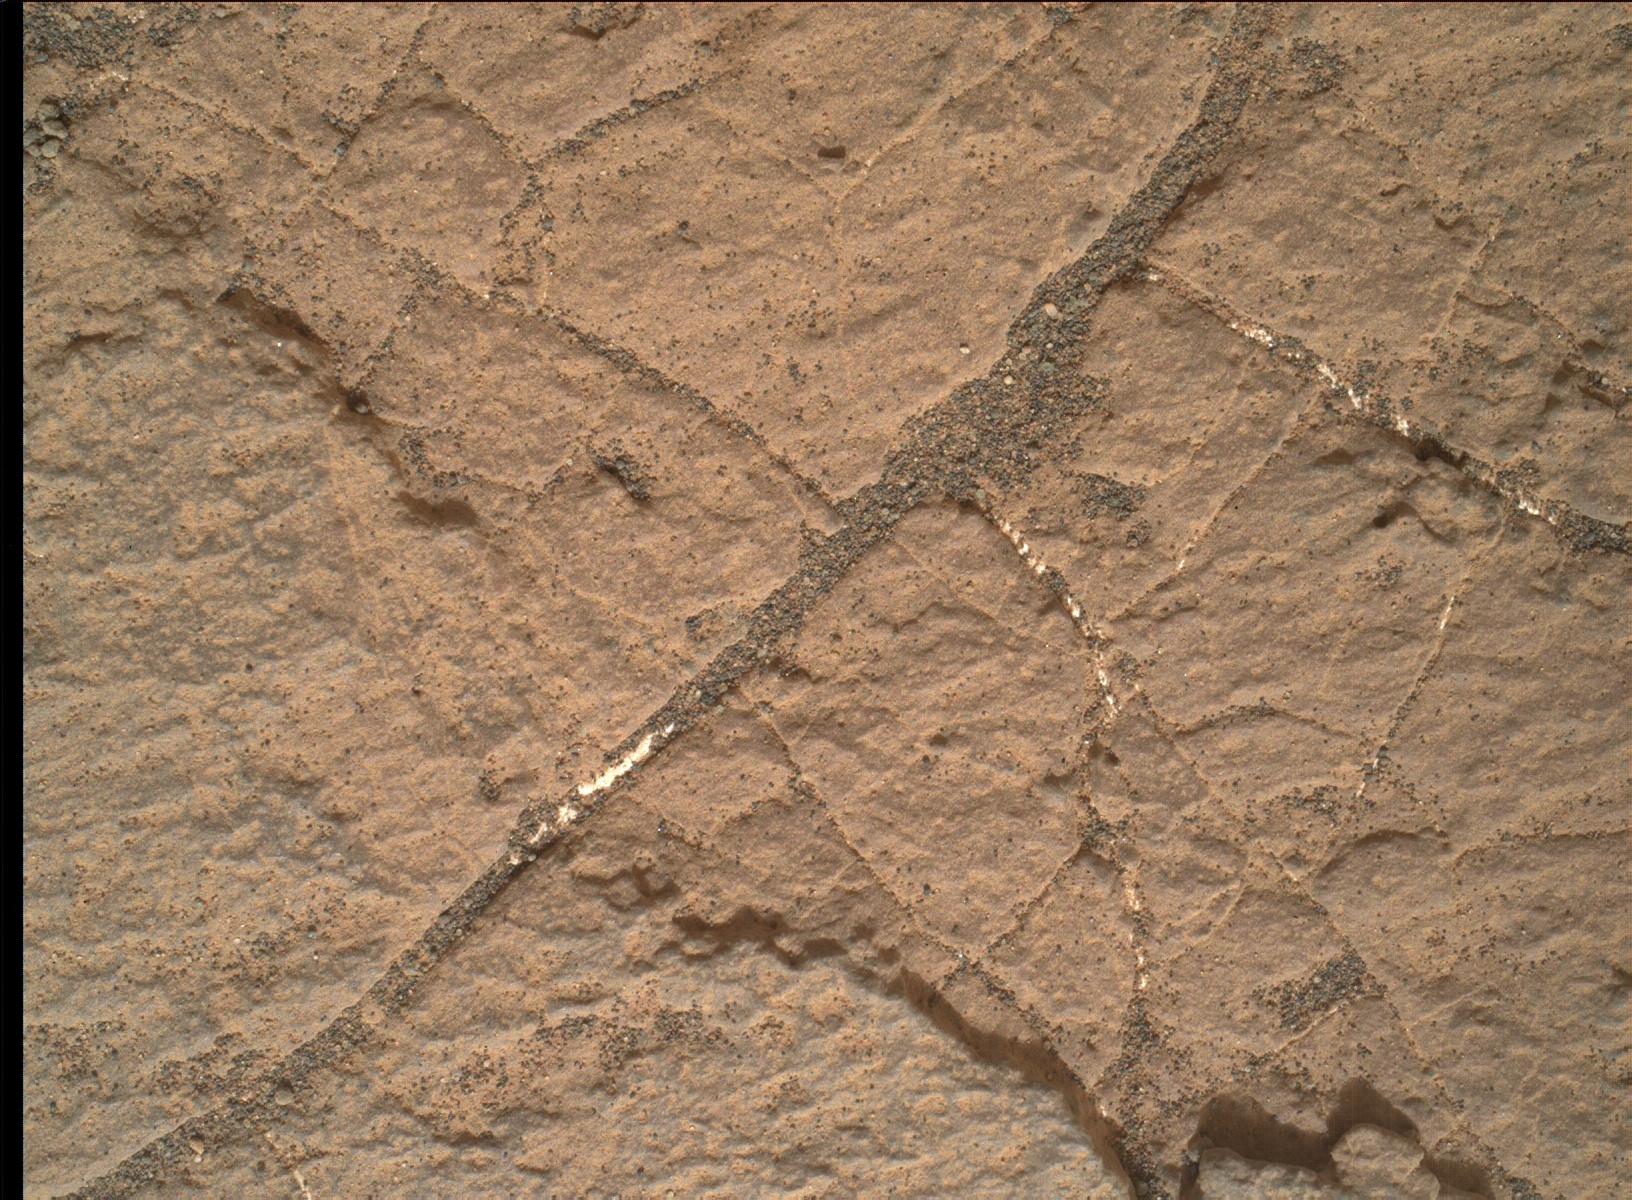 Nasa's Mars rover Curiosity acquired this image using its Mars Hand Lens Imager (MAHLI) on Sol 1477